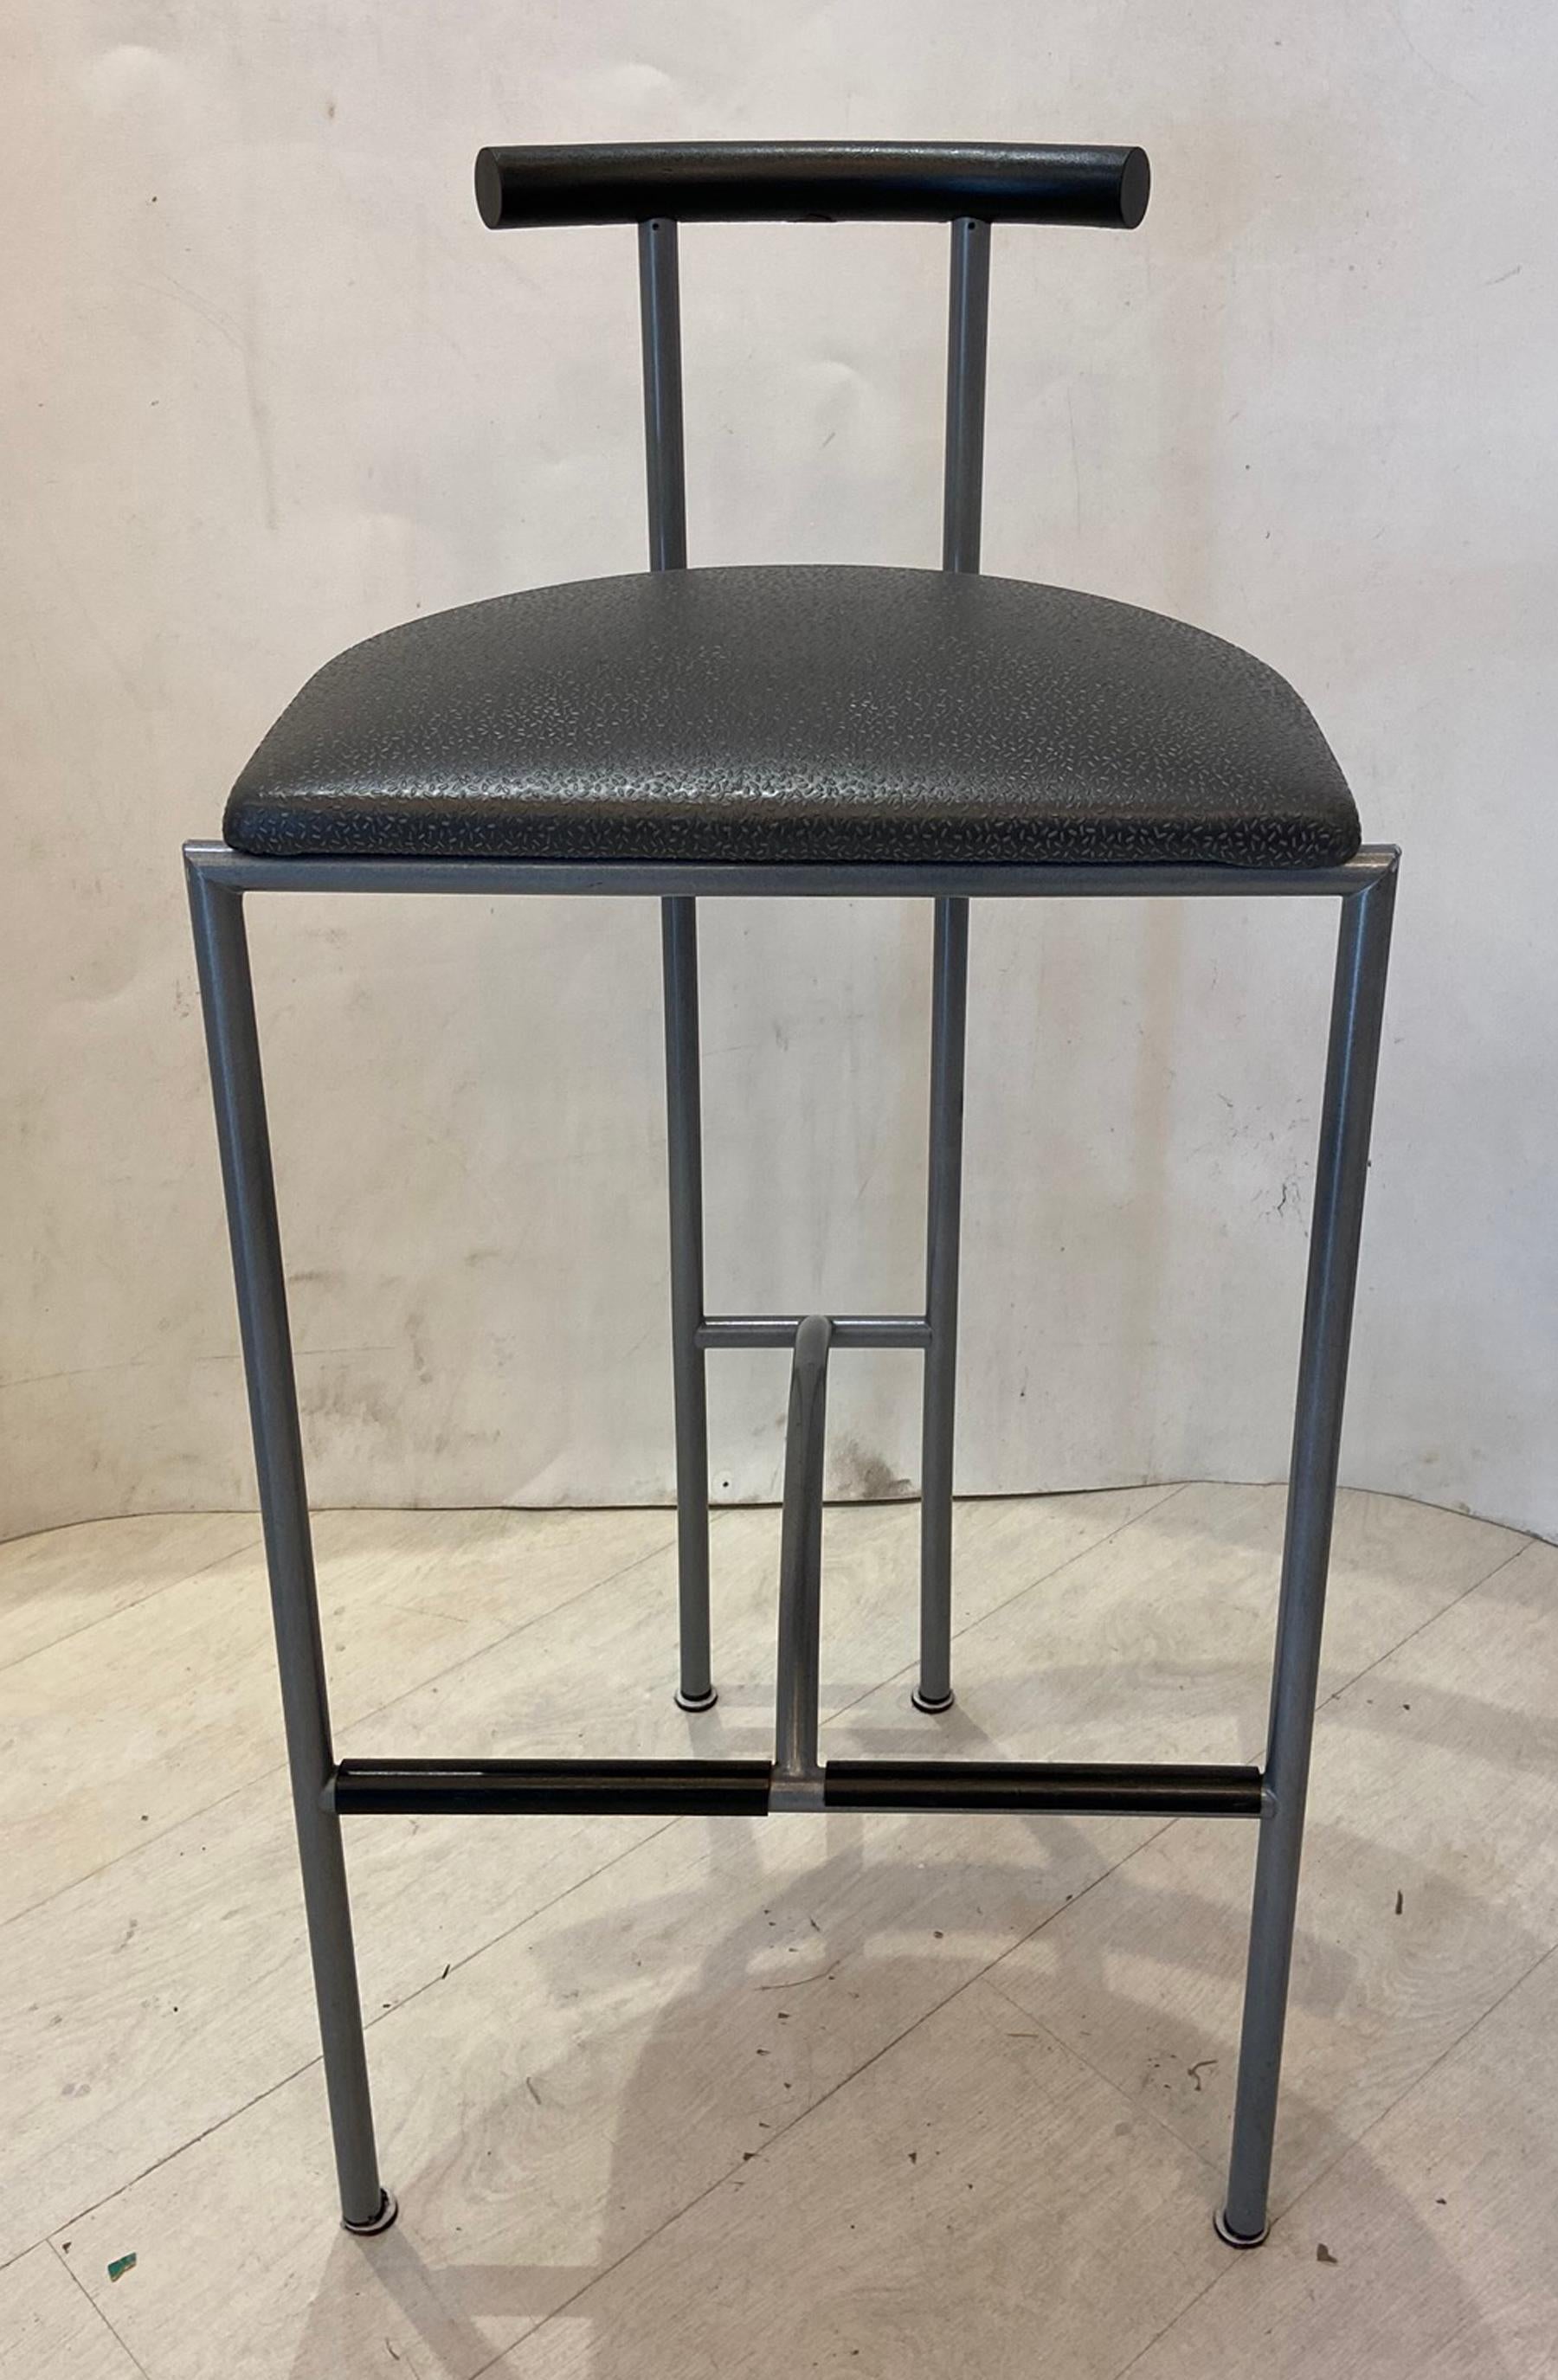 Three bar stools or counter stools by Bieffeplast made in Italy in the 1990s. Postmodern design.